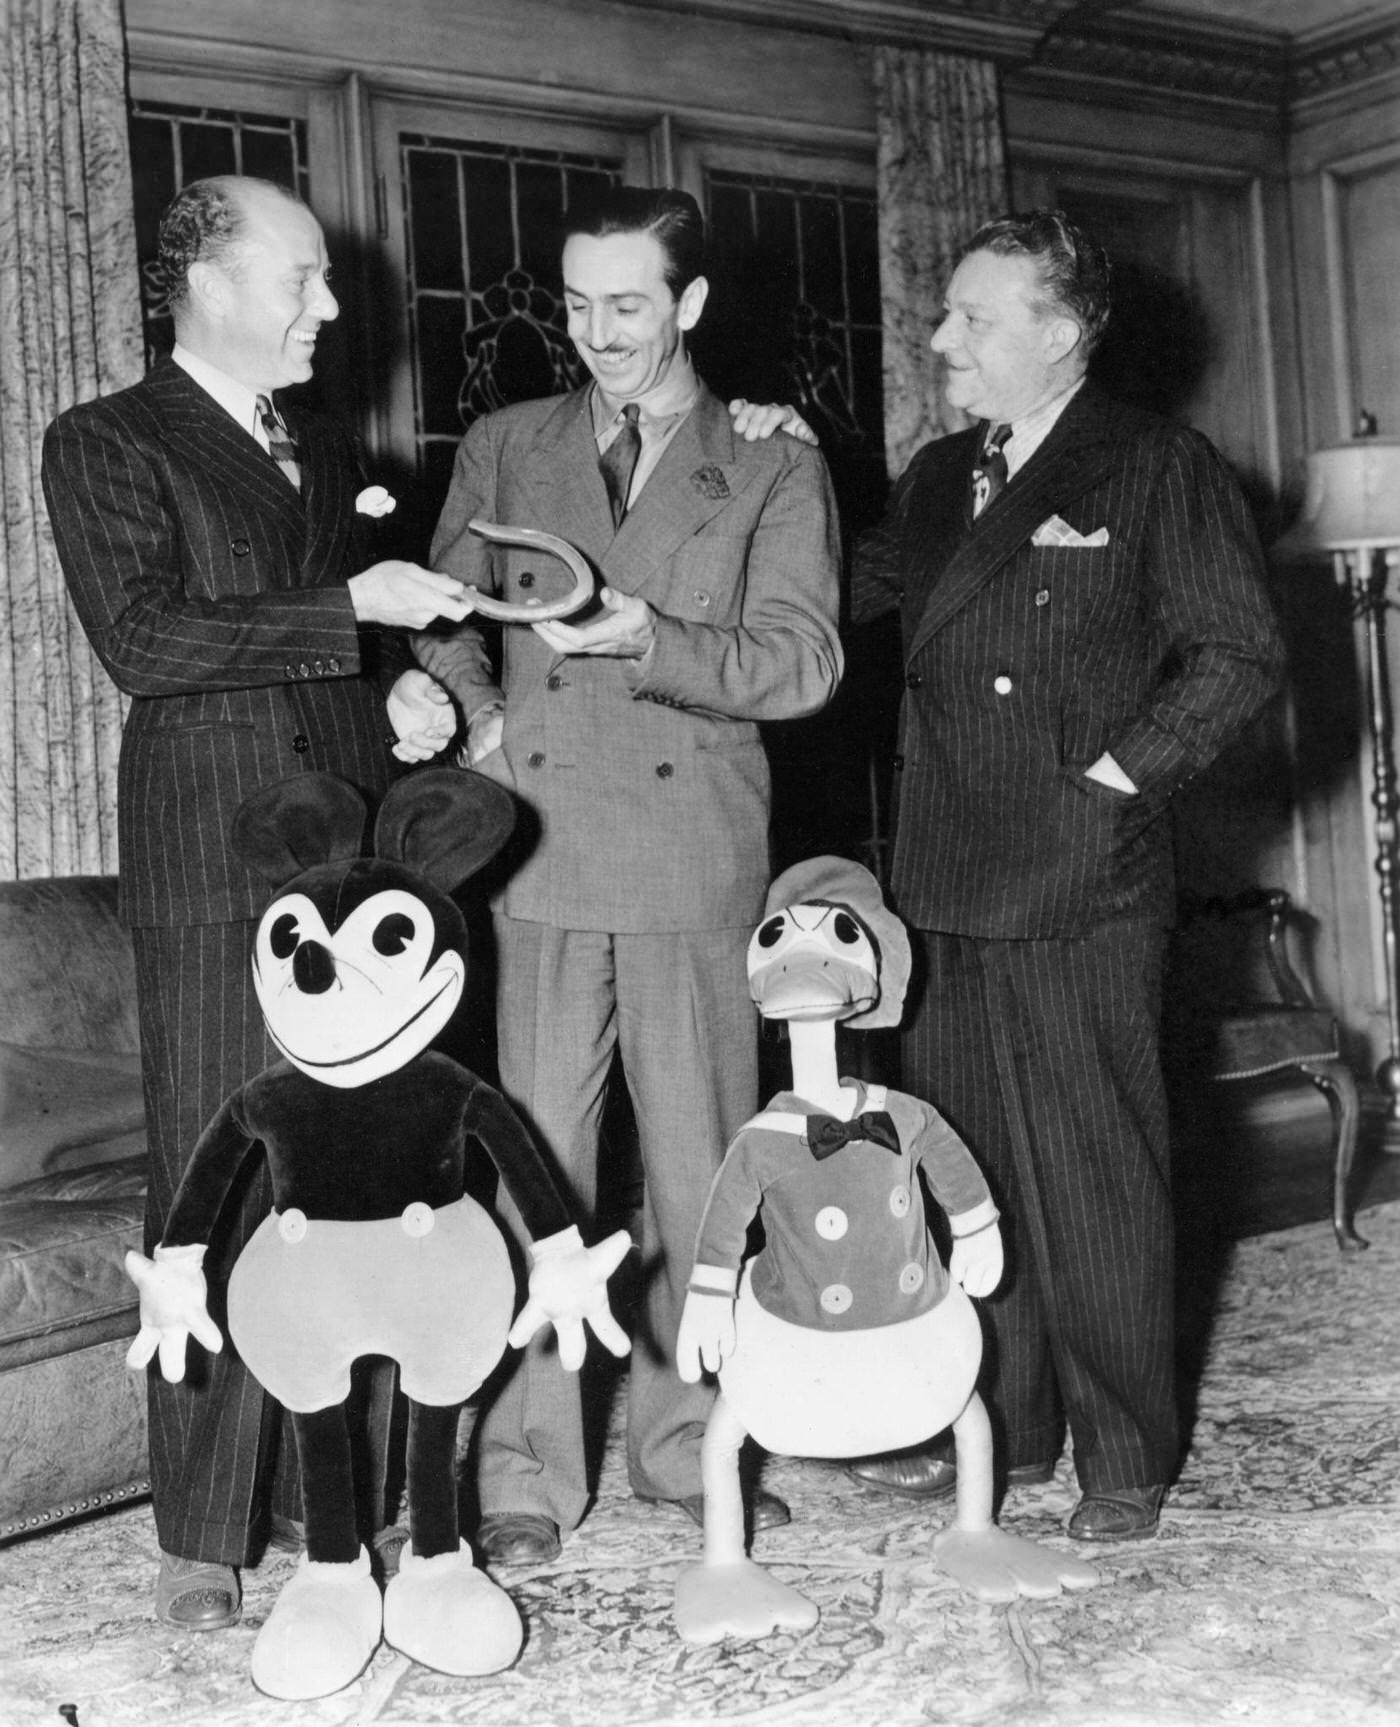 Mickey Mouse Theatre of the Air - Season 1. Amos 'n' Andy's Freeman Gosden, Mickey Mouse, Walt Disney, Donald Duck, Amos 'n' Andy's Charles Correll, 1937